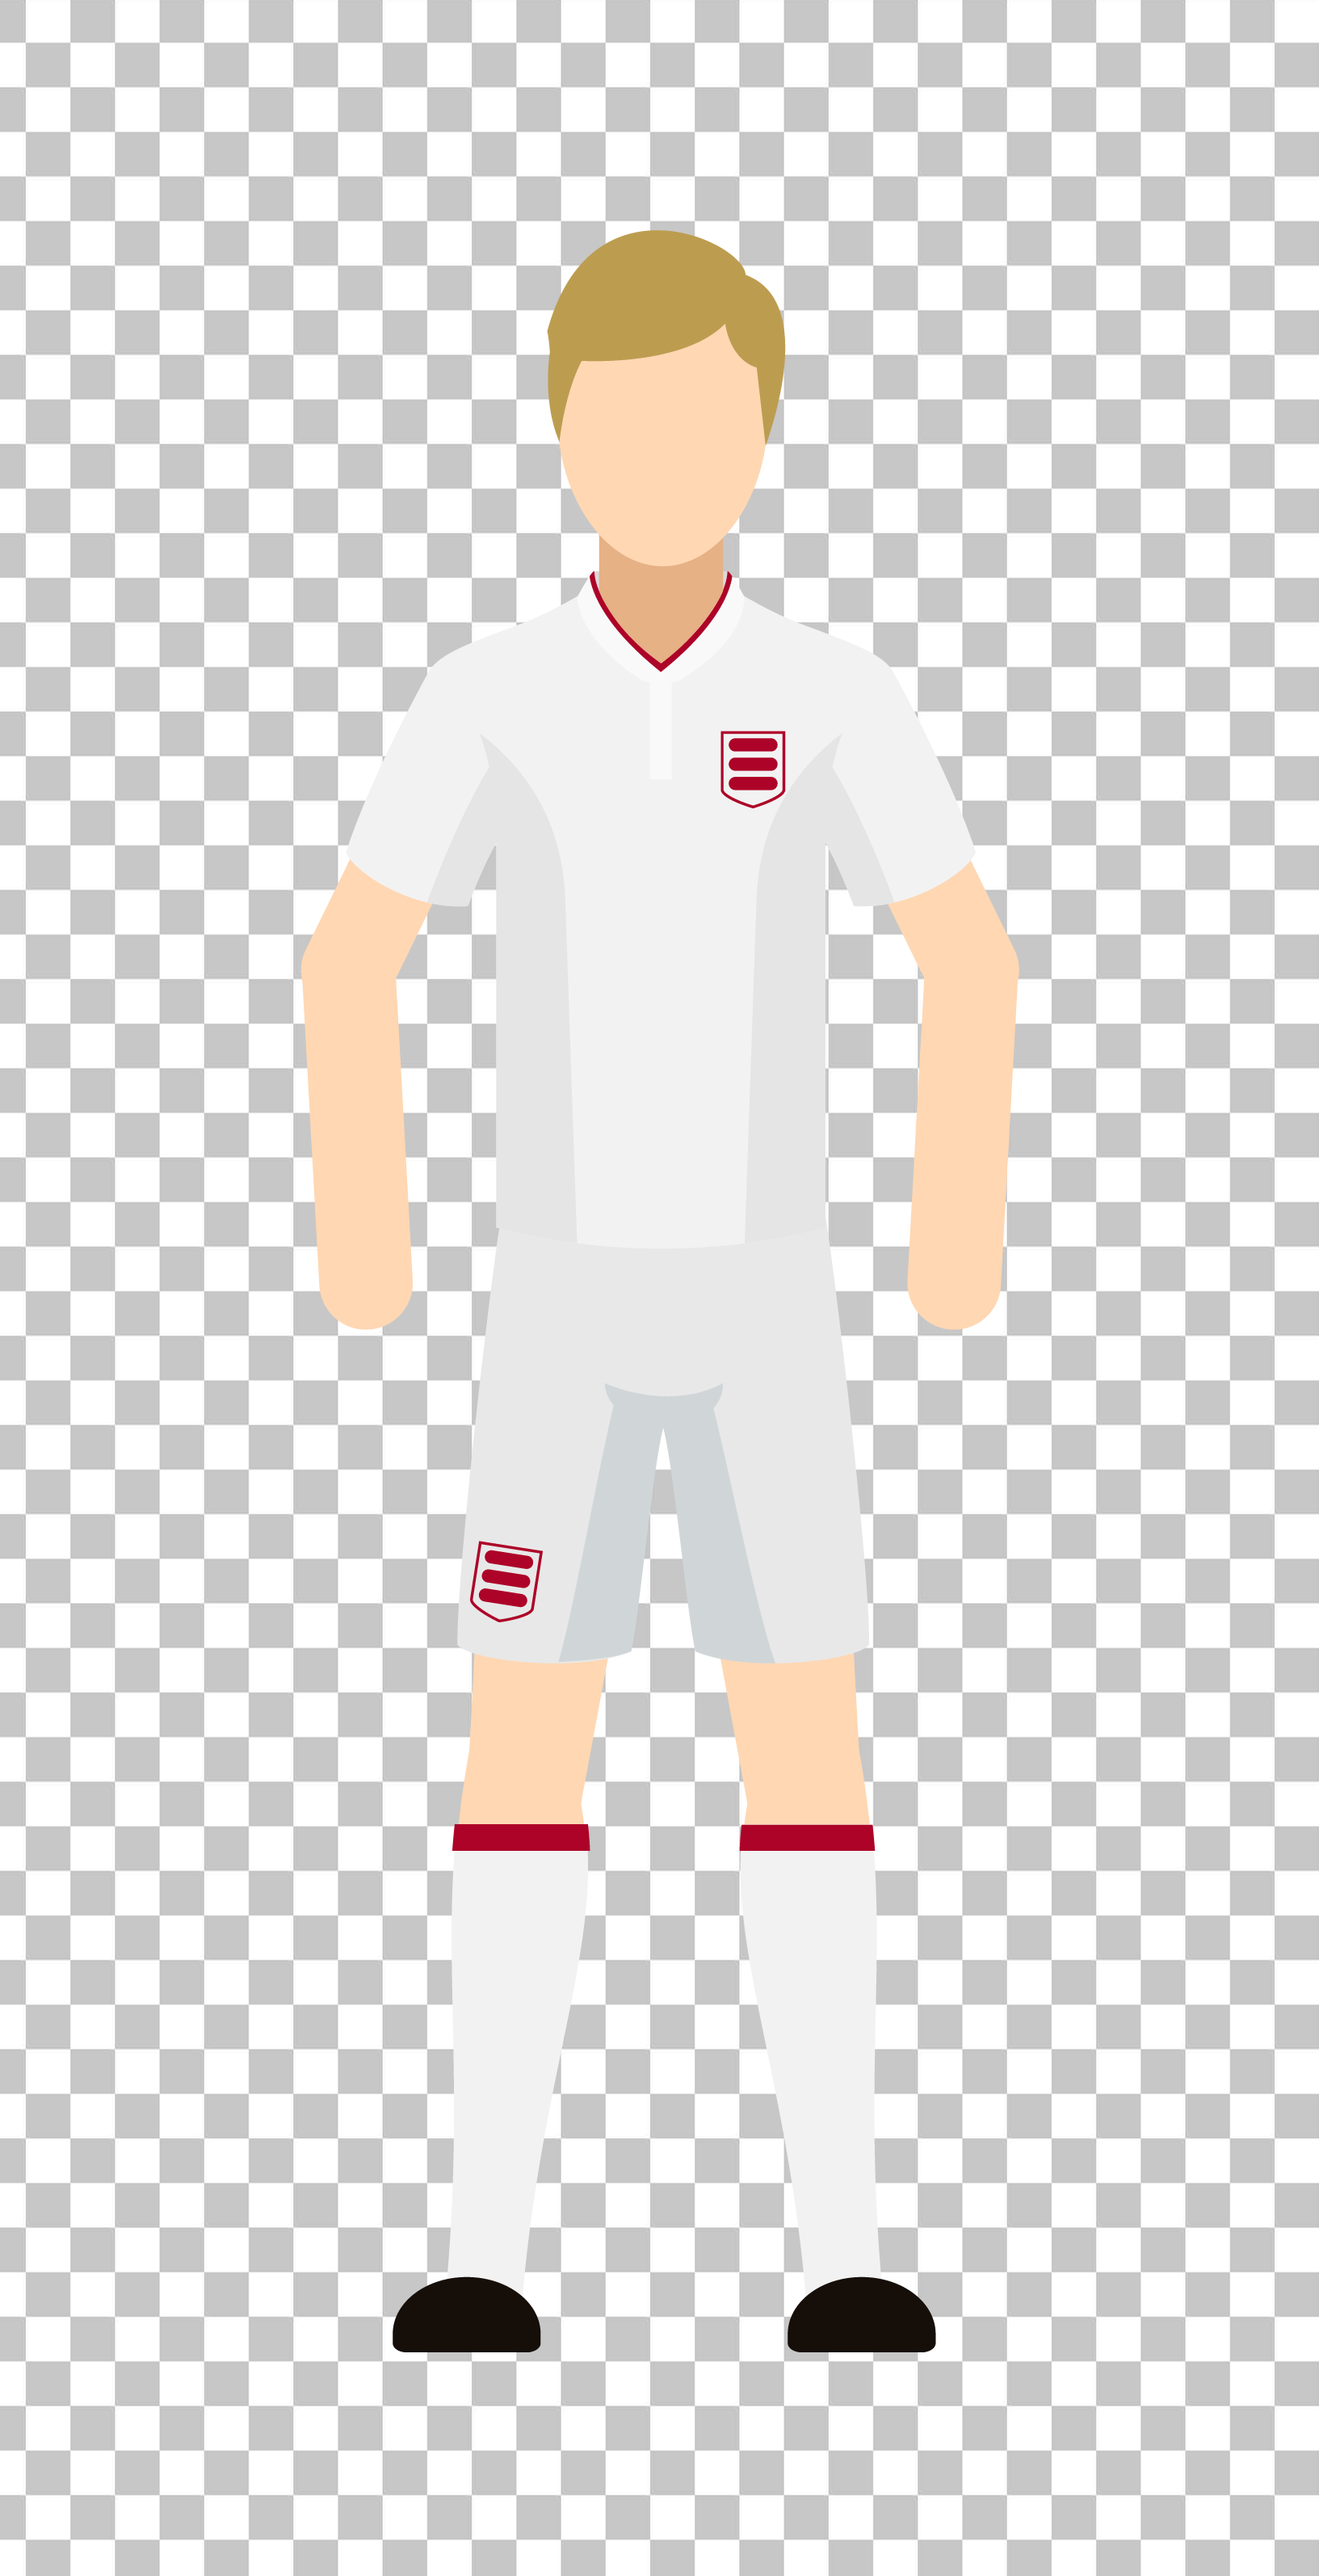 Player with England Football jersey Illustration